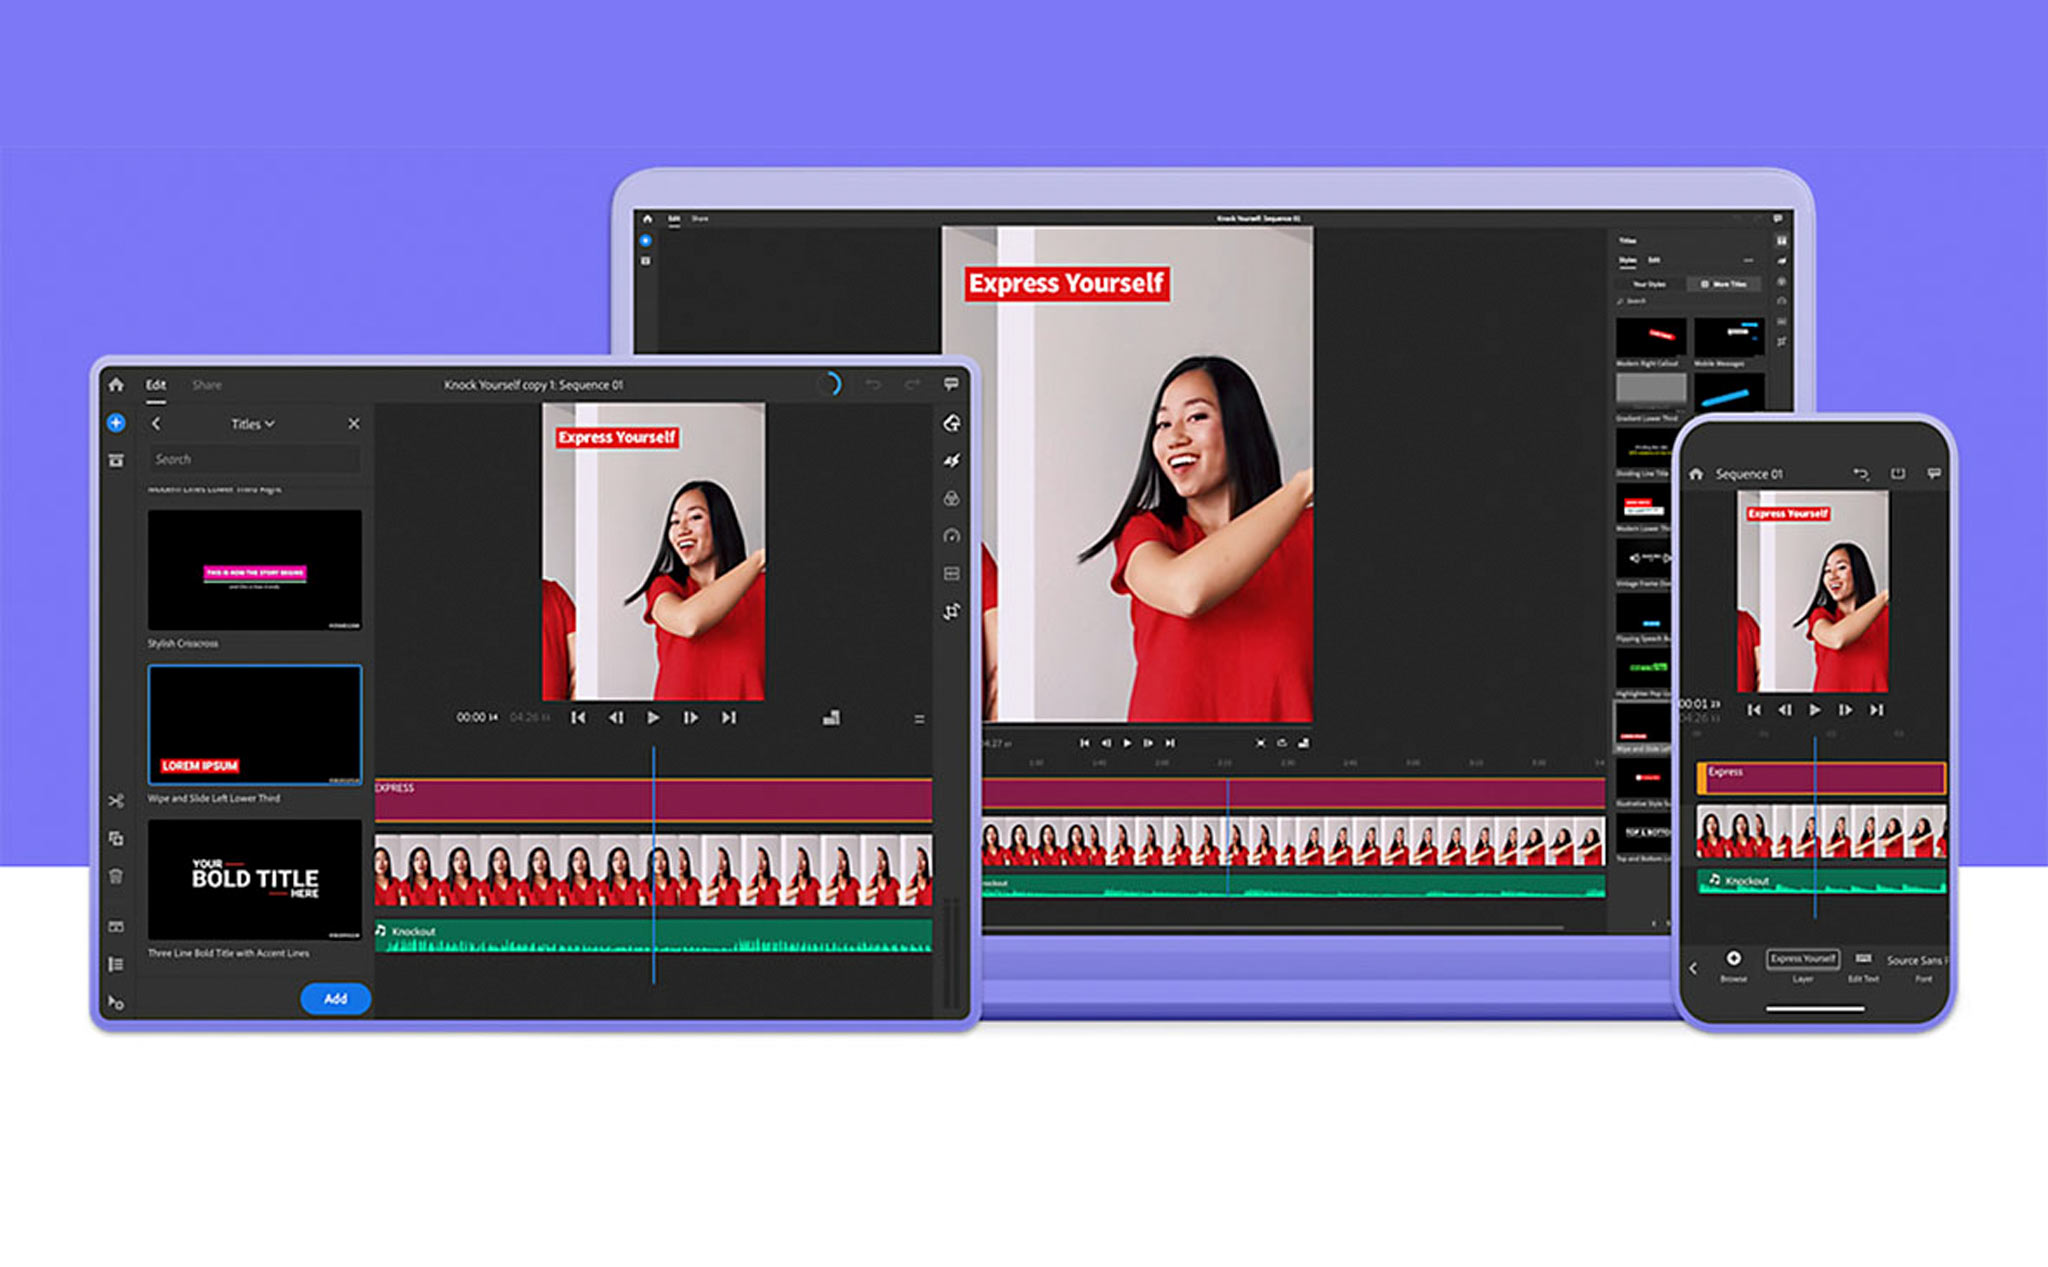 Adobe Premiere Rush and Photoshop Express will soon be integrated into the Adobe Photography Plan